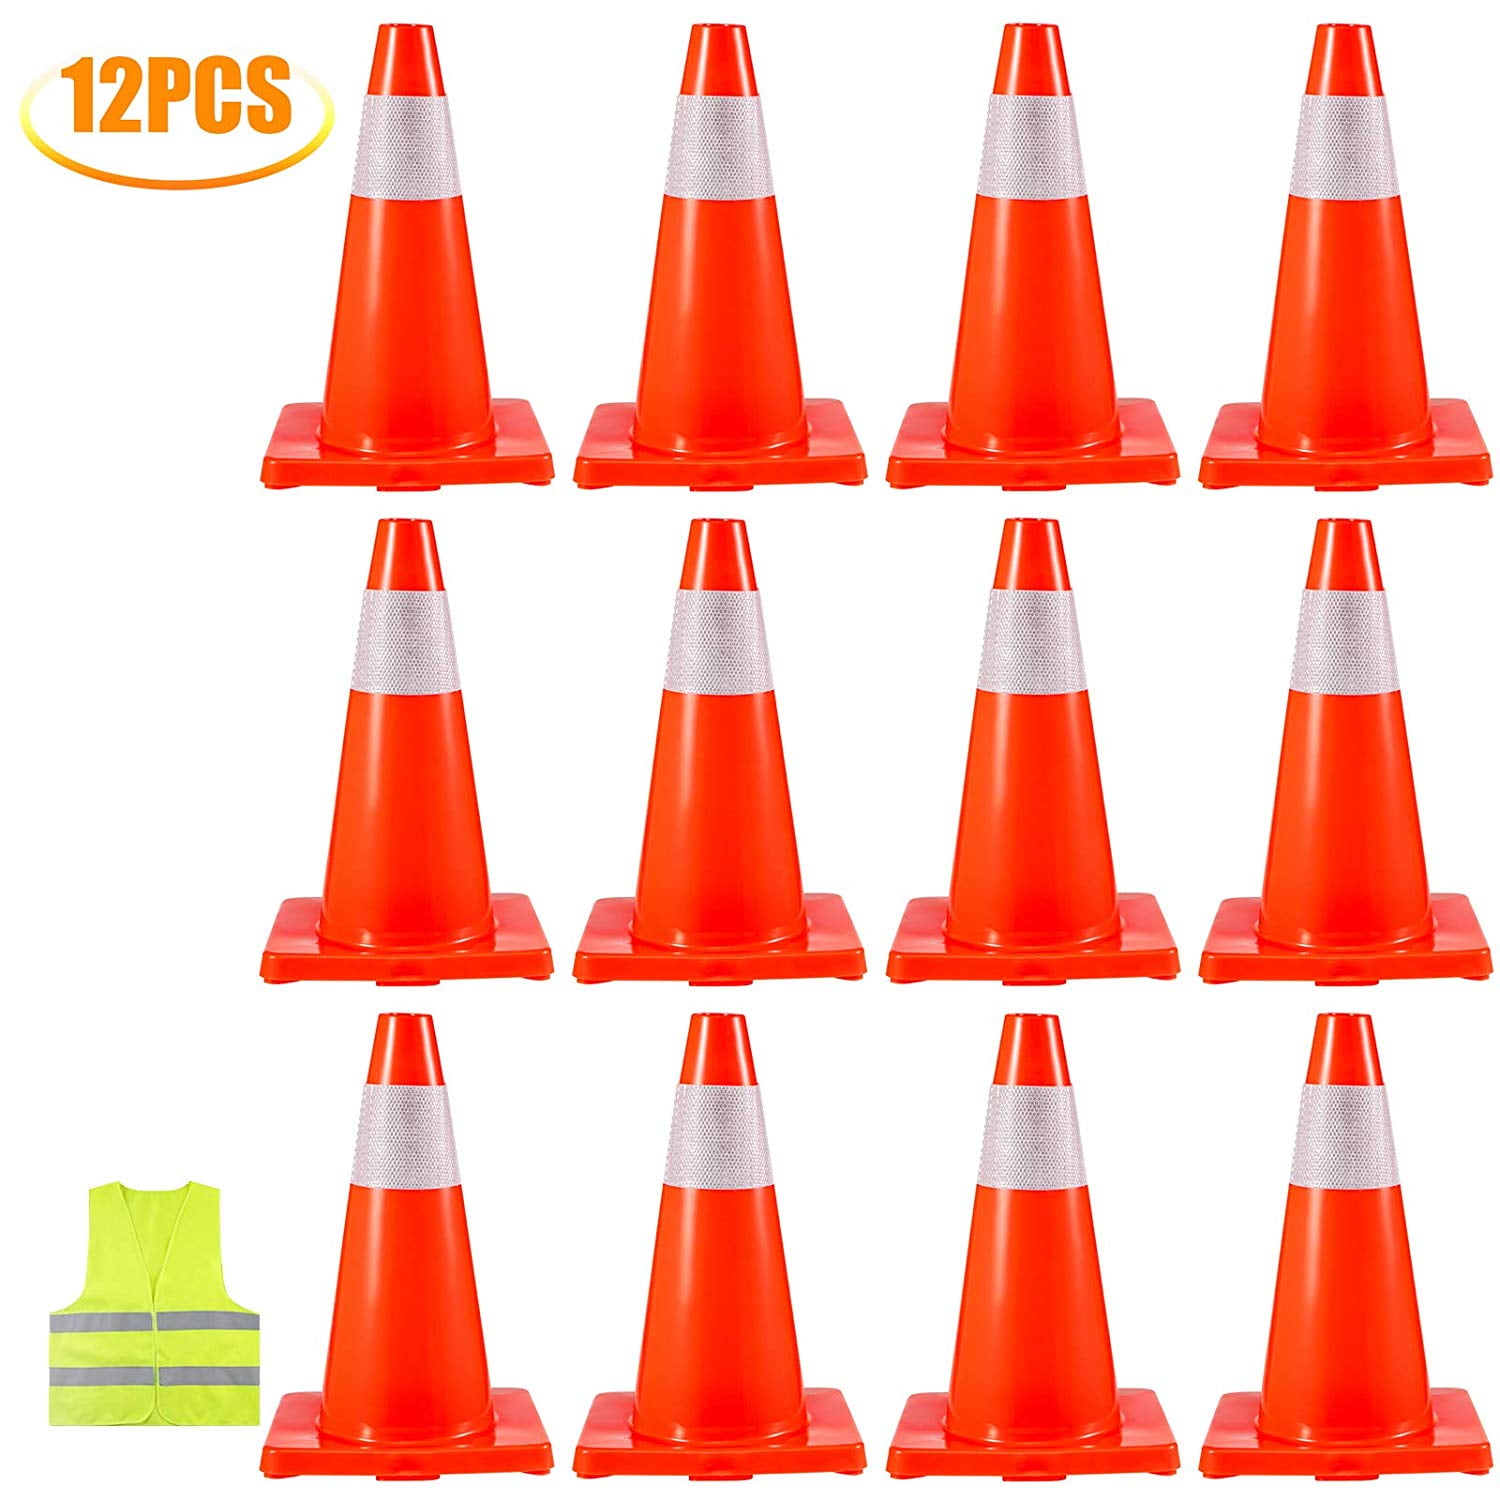 18" POP UP COLLAPSIBLE PORTABLE SAFETY CONE FOOTBALL TRAFFIC POSTS DRIVING CONES 